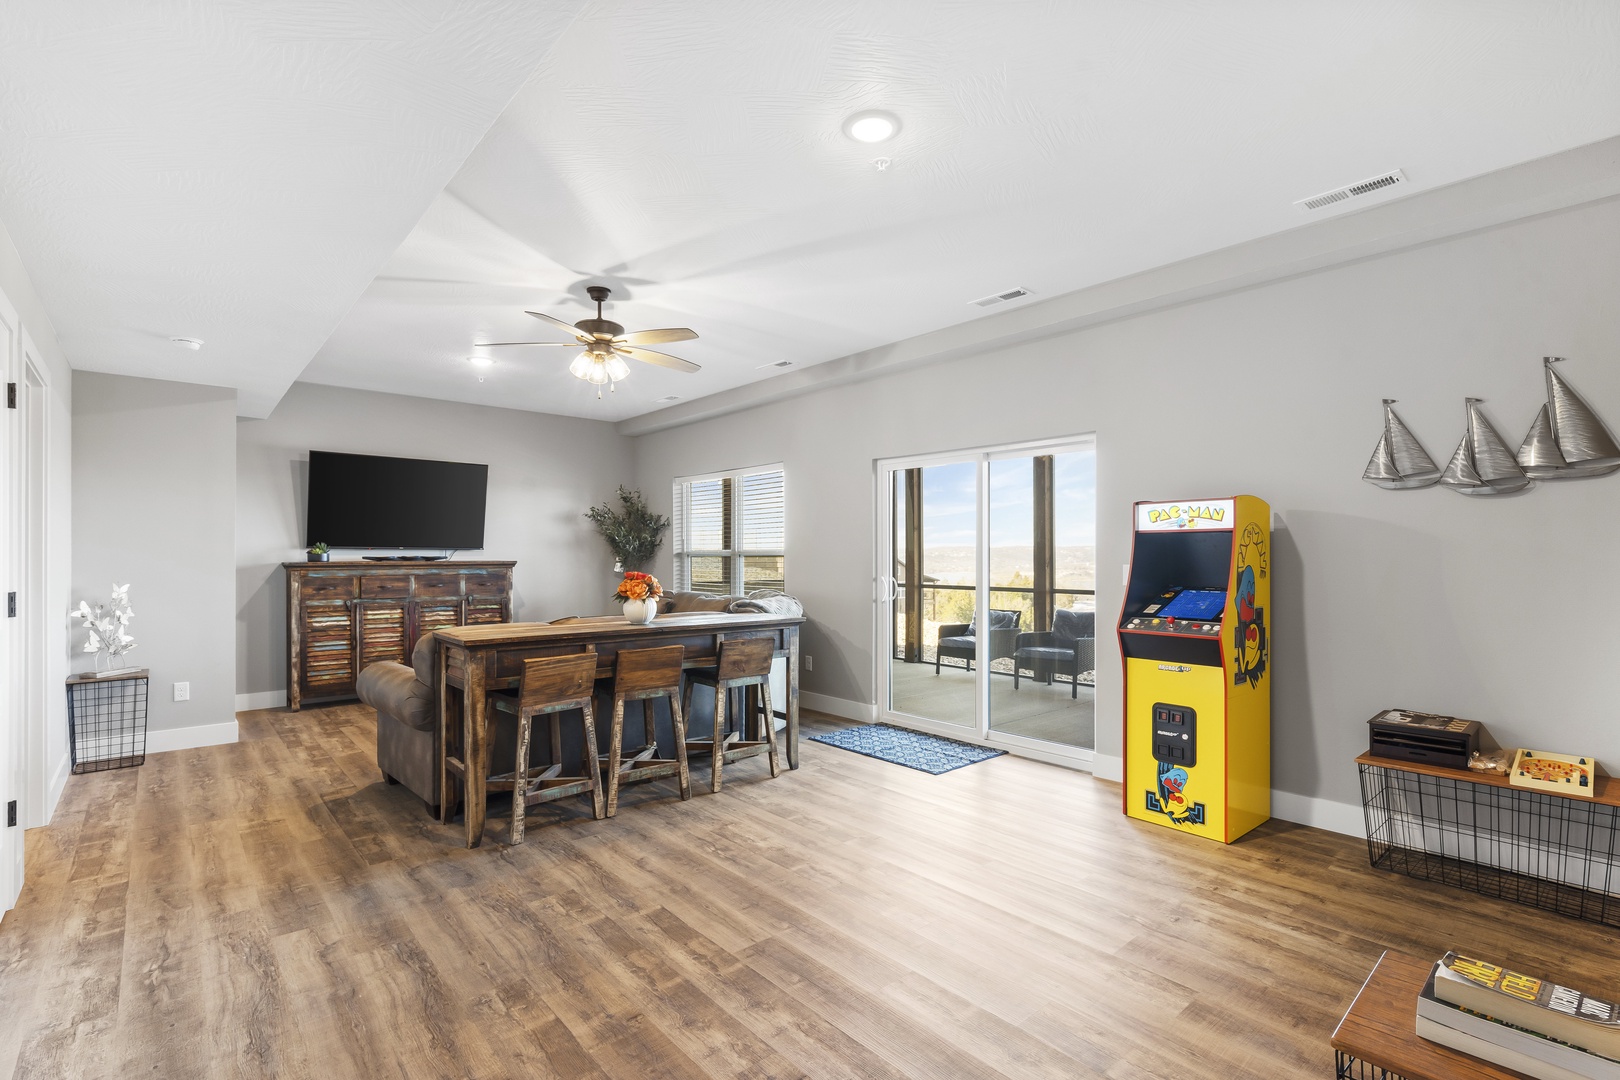 Basement game room with sofa sleeper, Smart TV, and bottom deck access